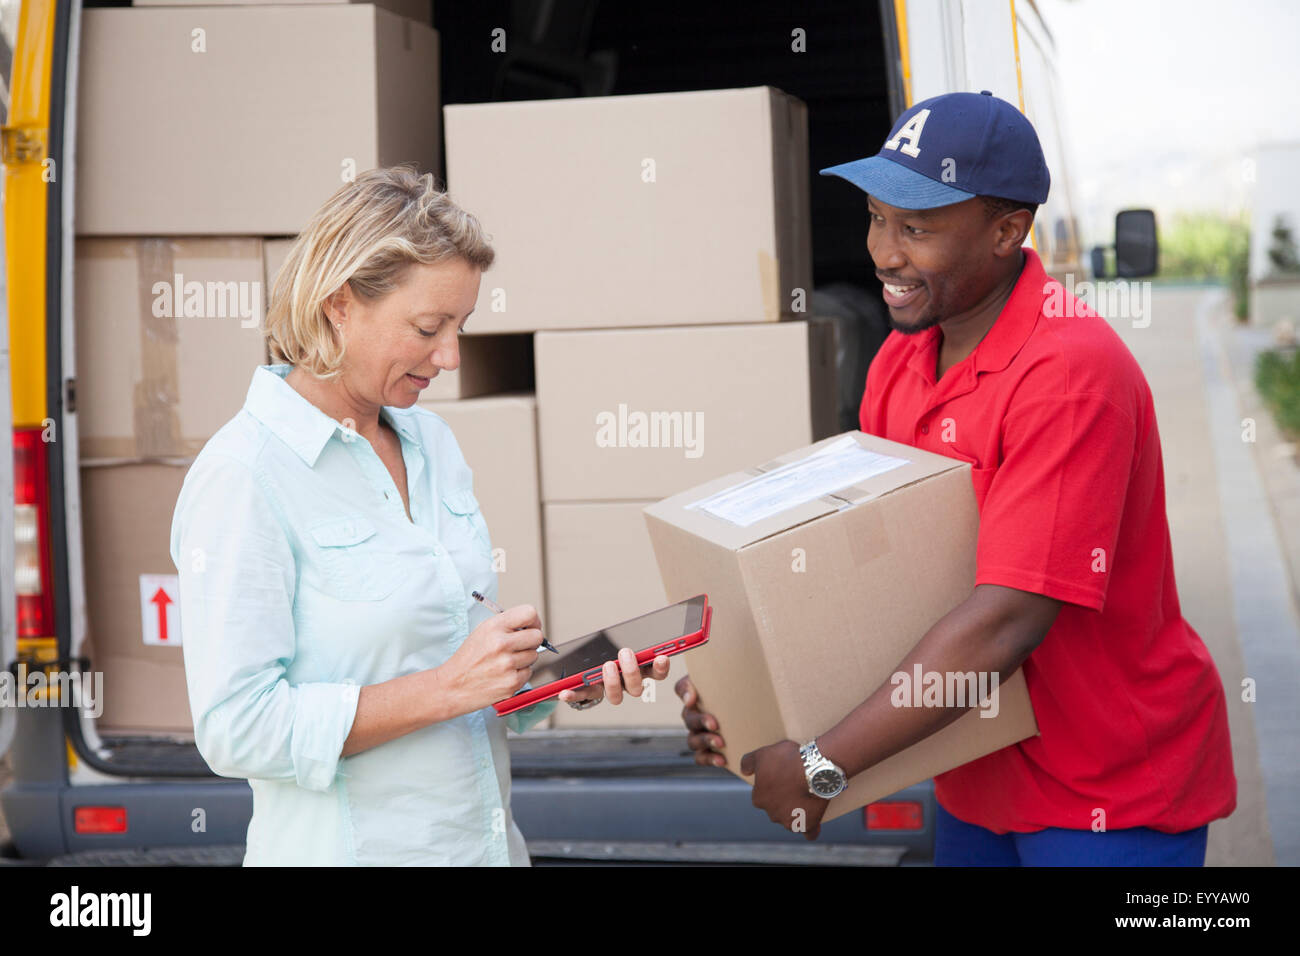 Delivery man holding cardboard box with customer Stock Photo